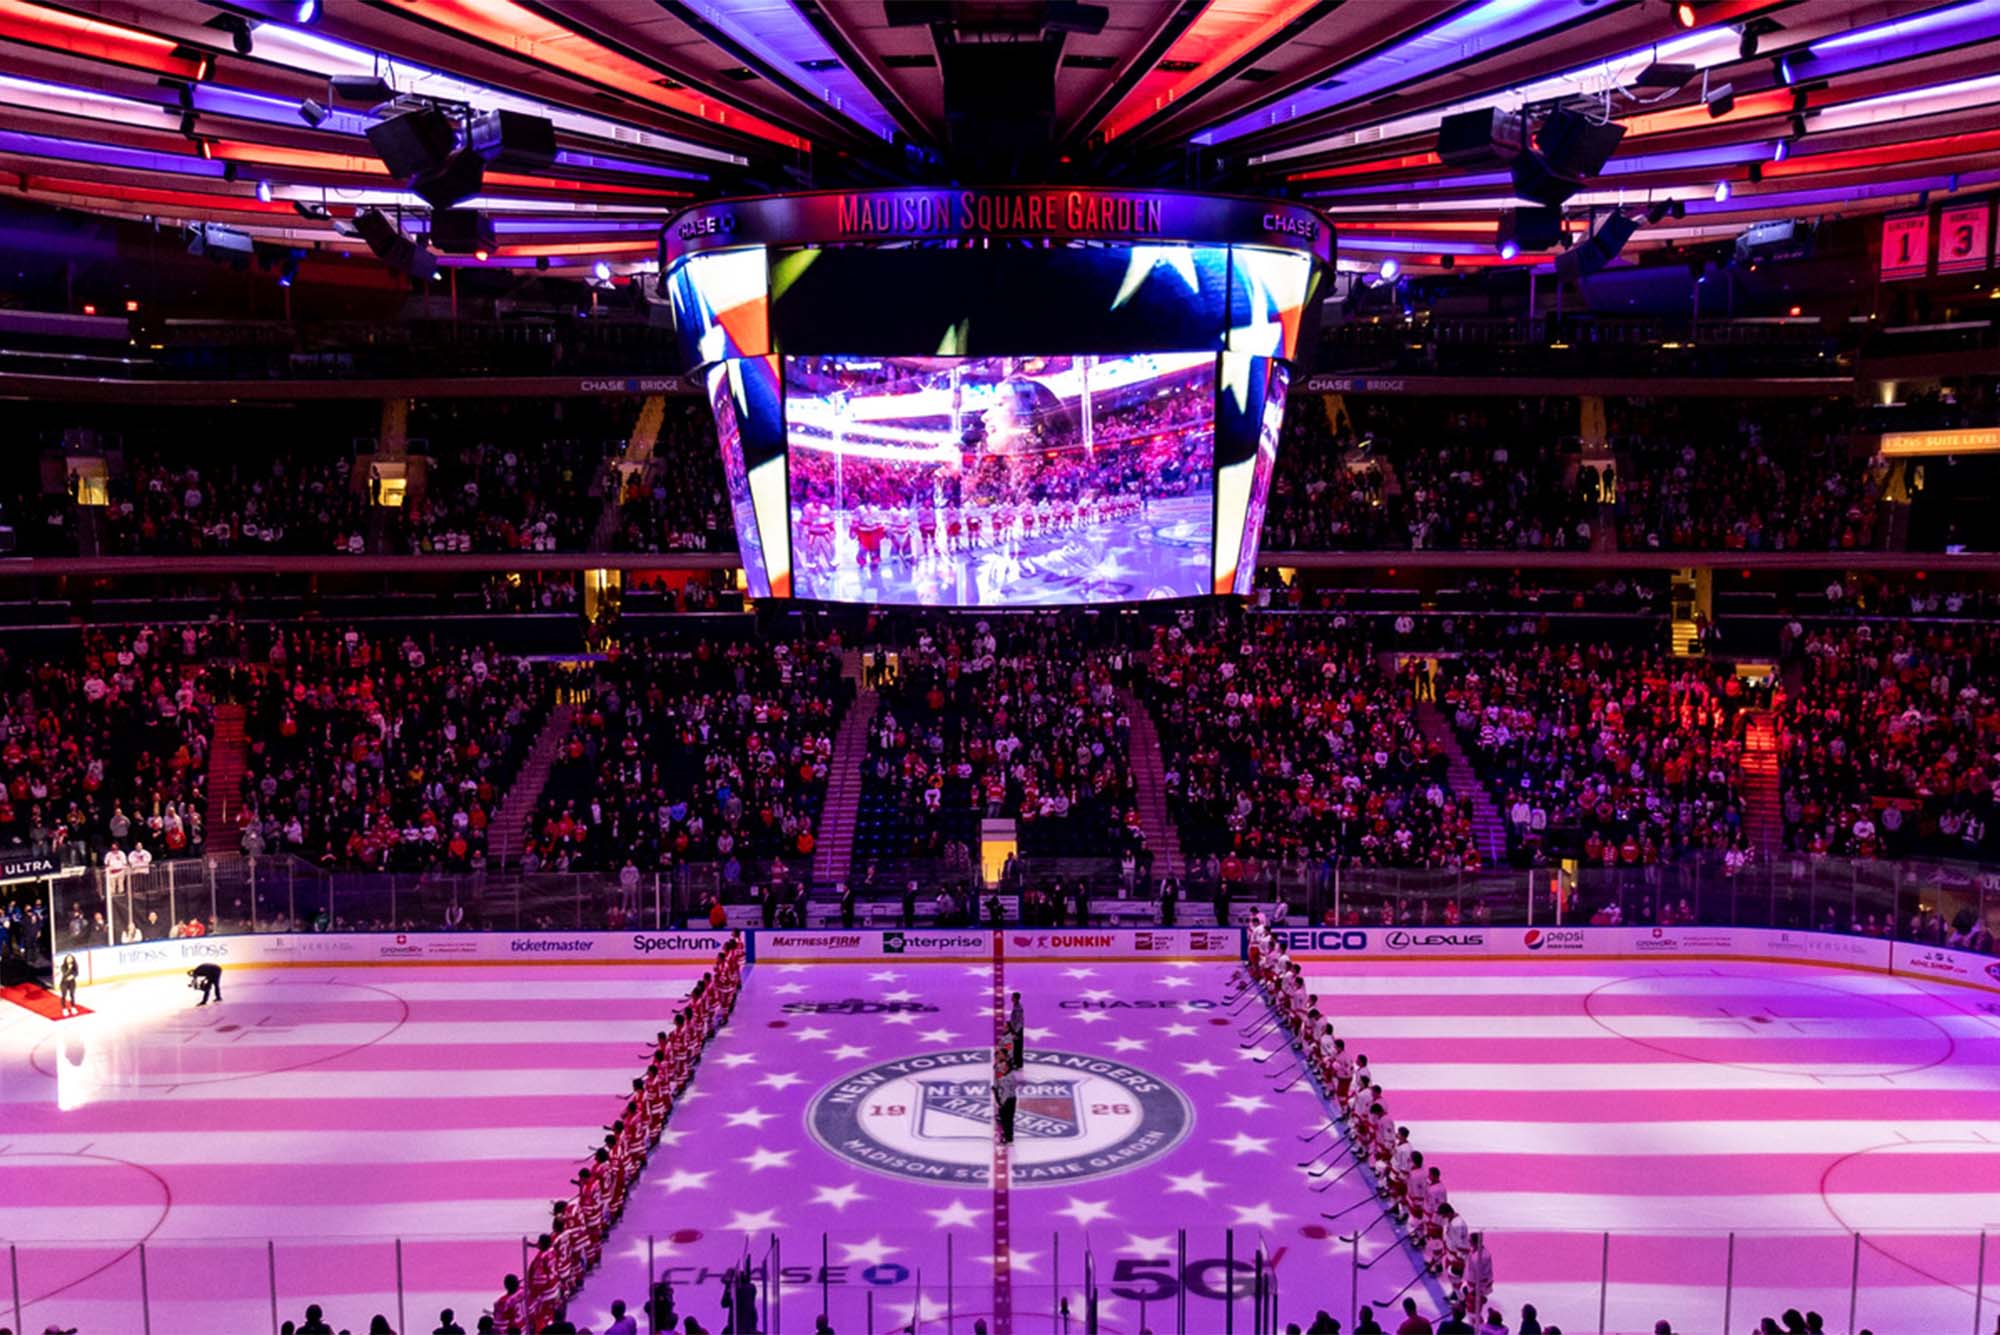 Photo: The interior of Madison Square Garden, packed with people. A large ice rink is visible under a gigantic jumbotron depicting hockey players skating on the ice